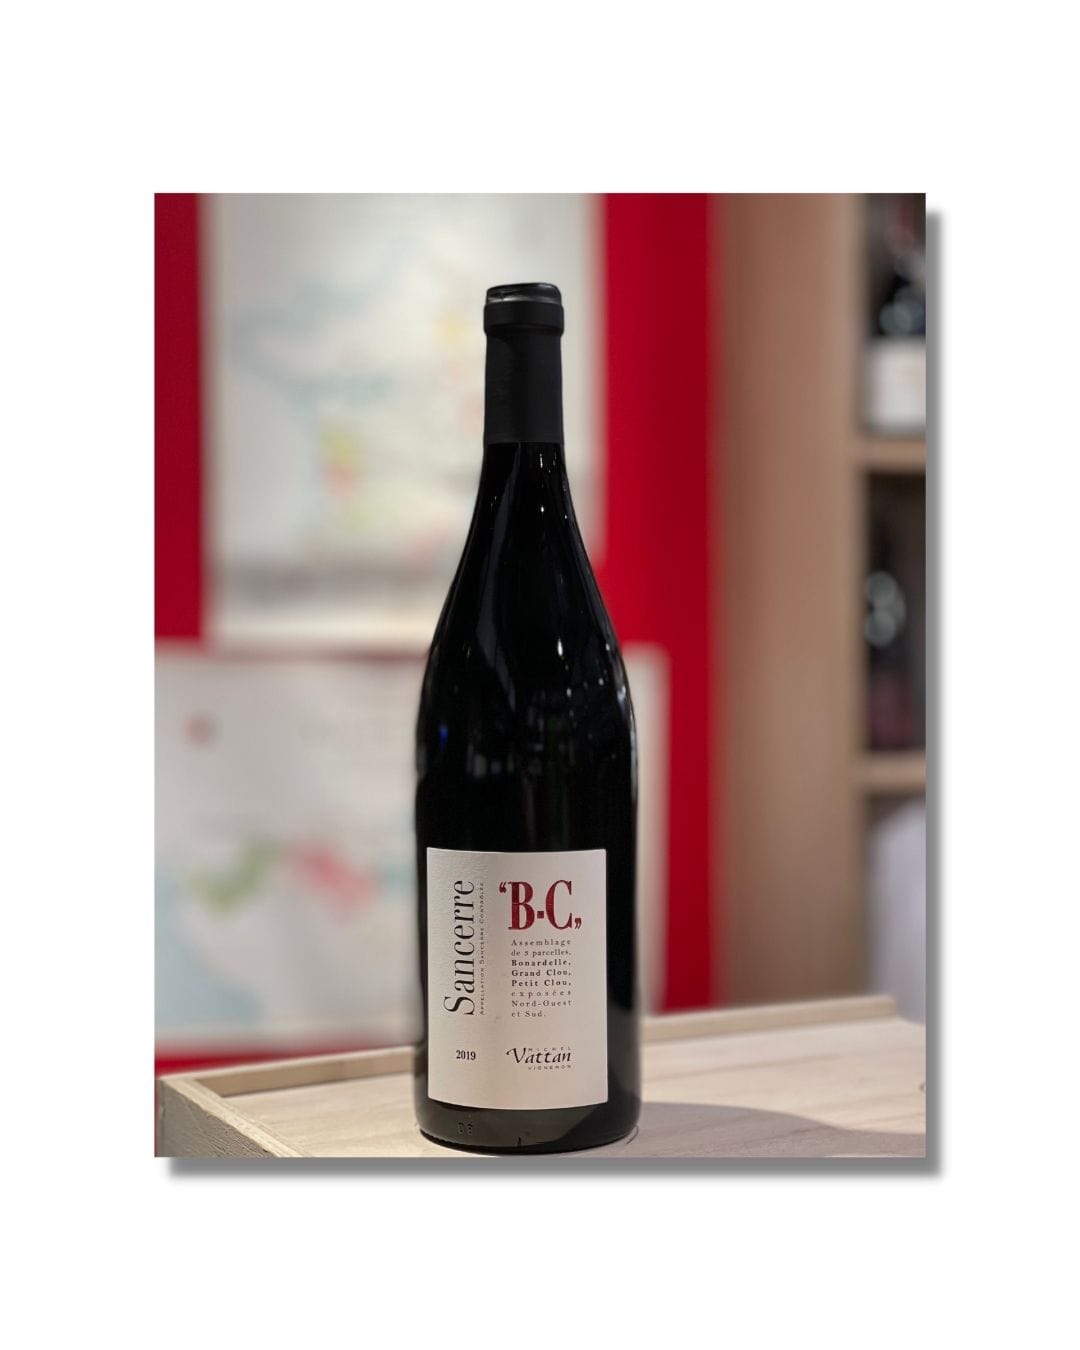 Shop Domaine Michel Vattan Domaine Michel Vattan Sancerre Rouge Cuvée B-C 2019 online at PENTICTON artisanal French wine store in Hong Kong. Discover other French wines, promotions, workshops and featured offers at pentictonpacific.com 